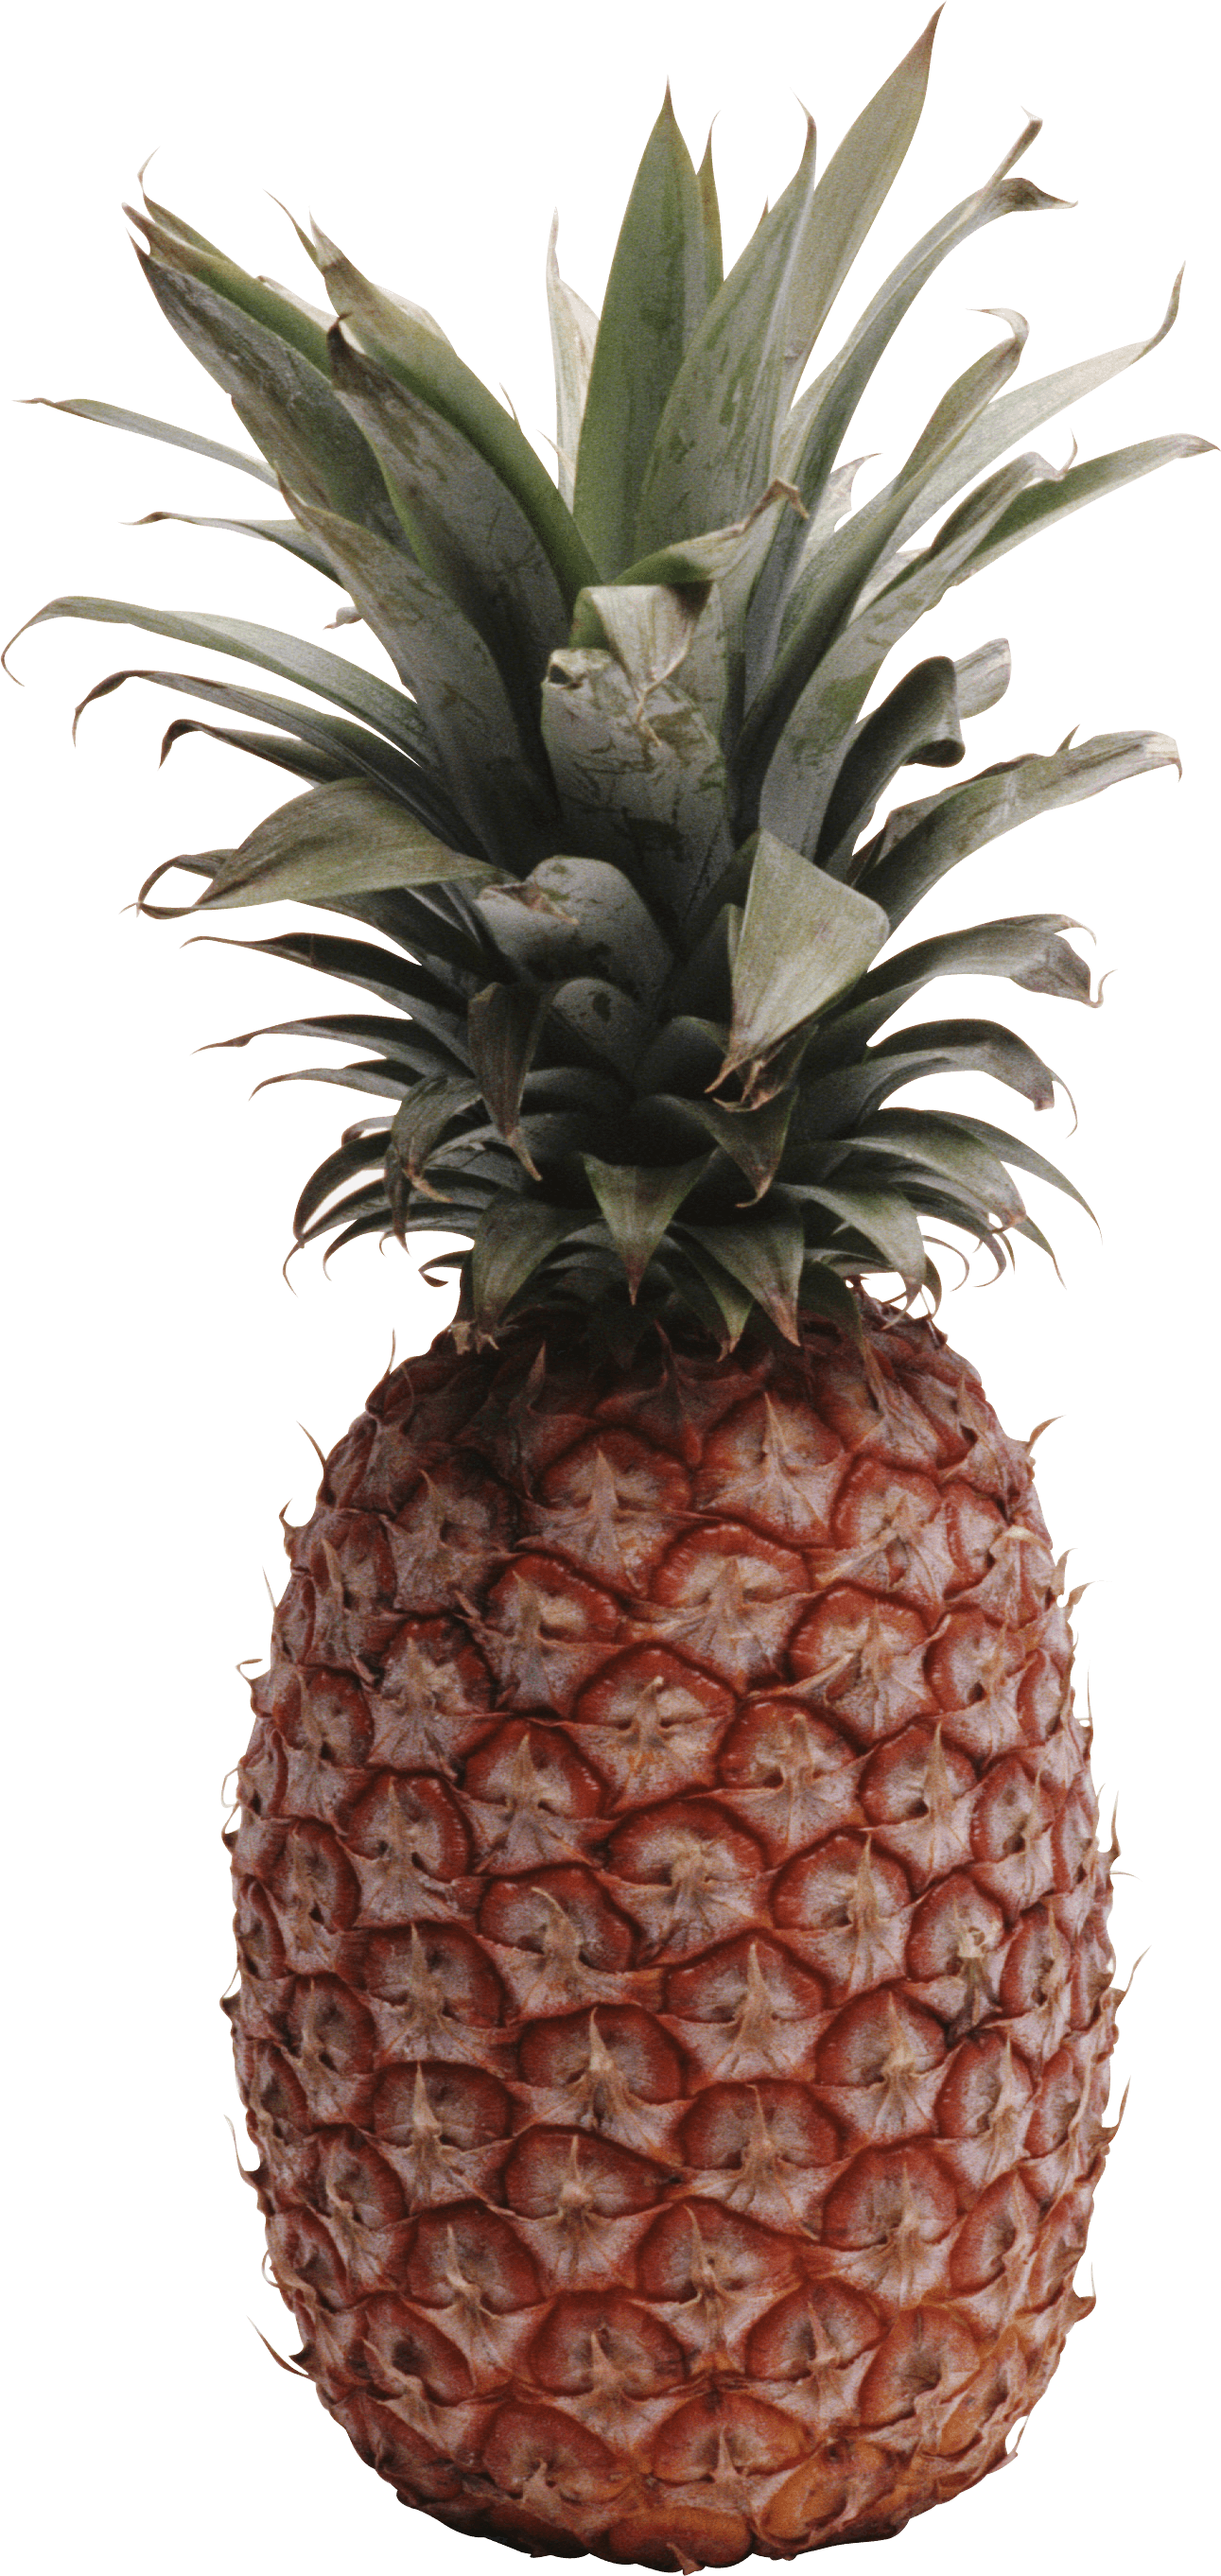 Pineapple Png Image Download PNG Image